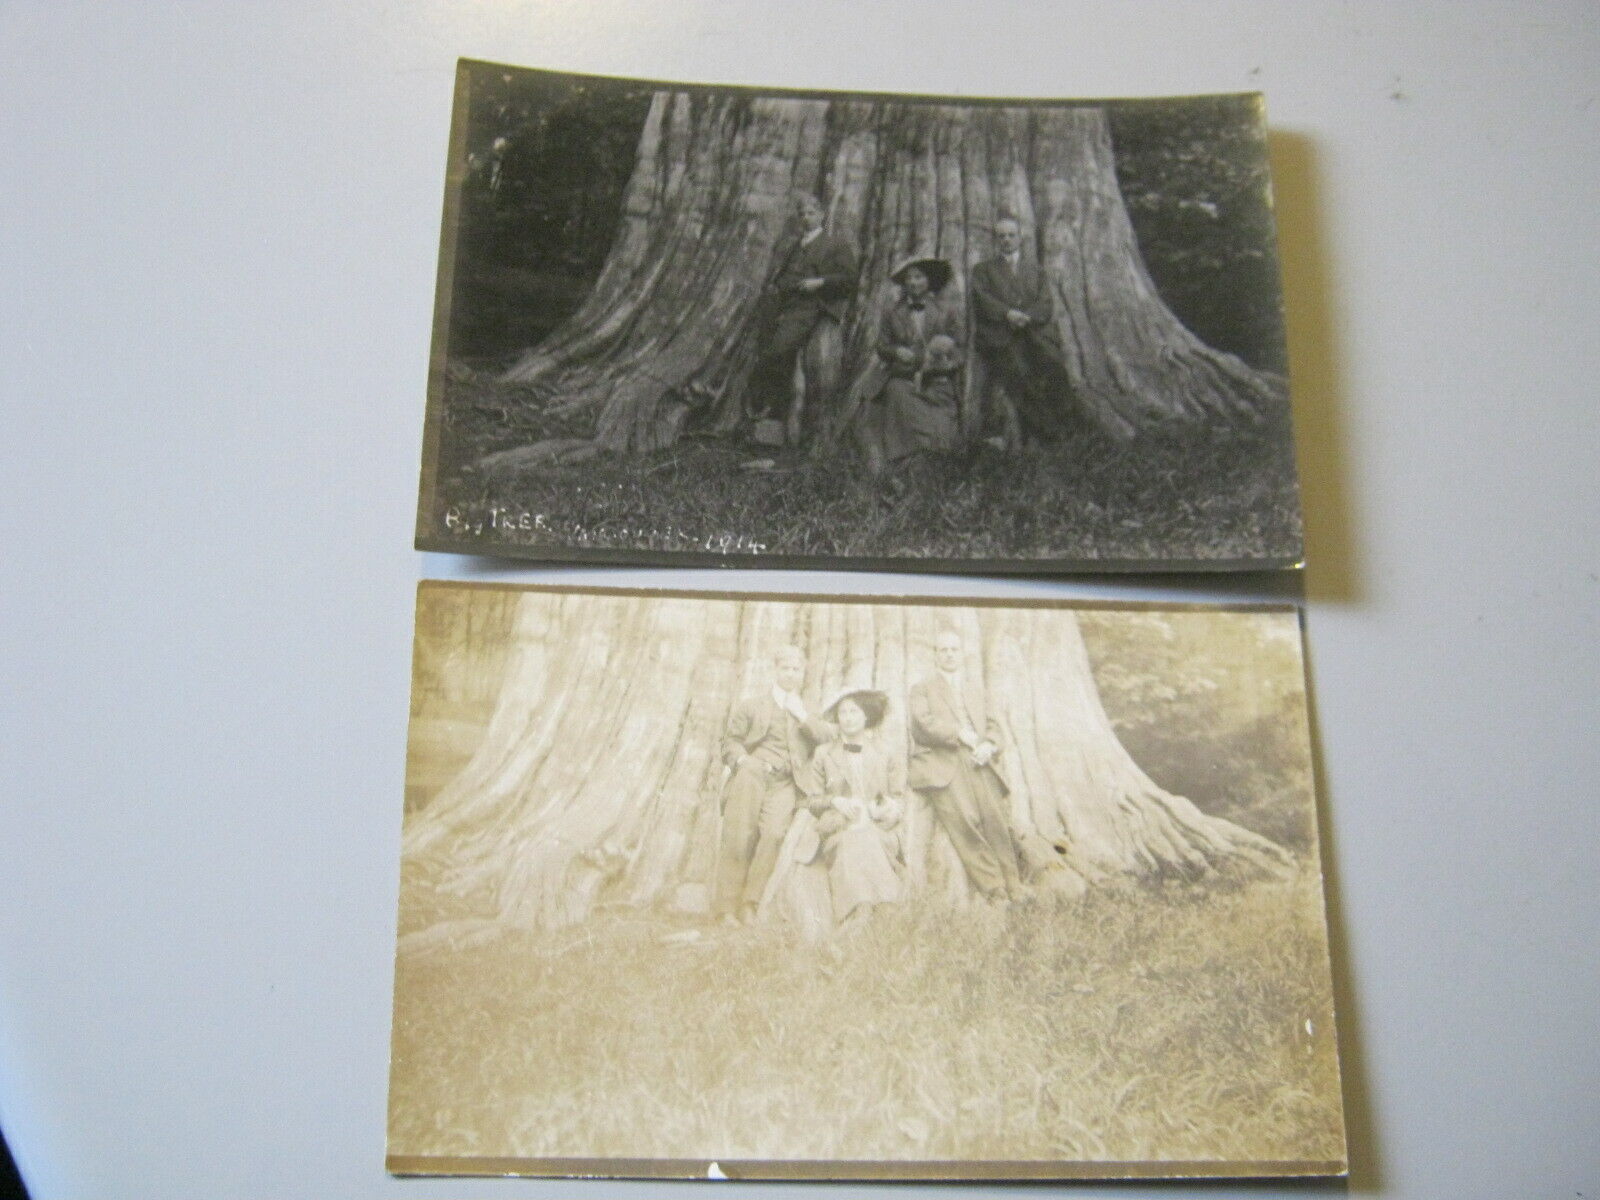 House Clearance - POSTCARDS CANADA 2 x RP of "BIG TREE" STANLEY PARK VANCOUVER c. 1910 UNPOSTED